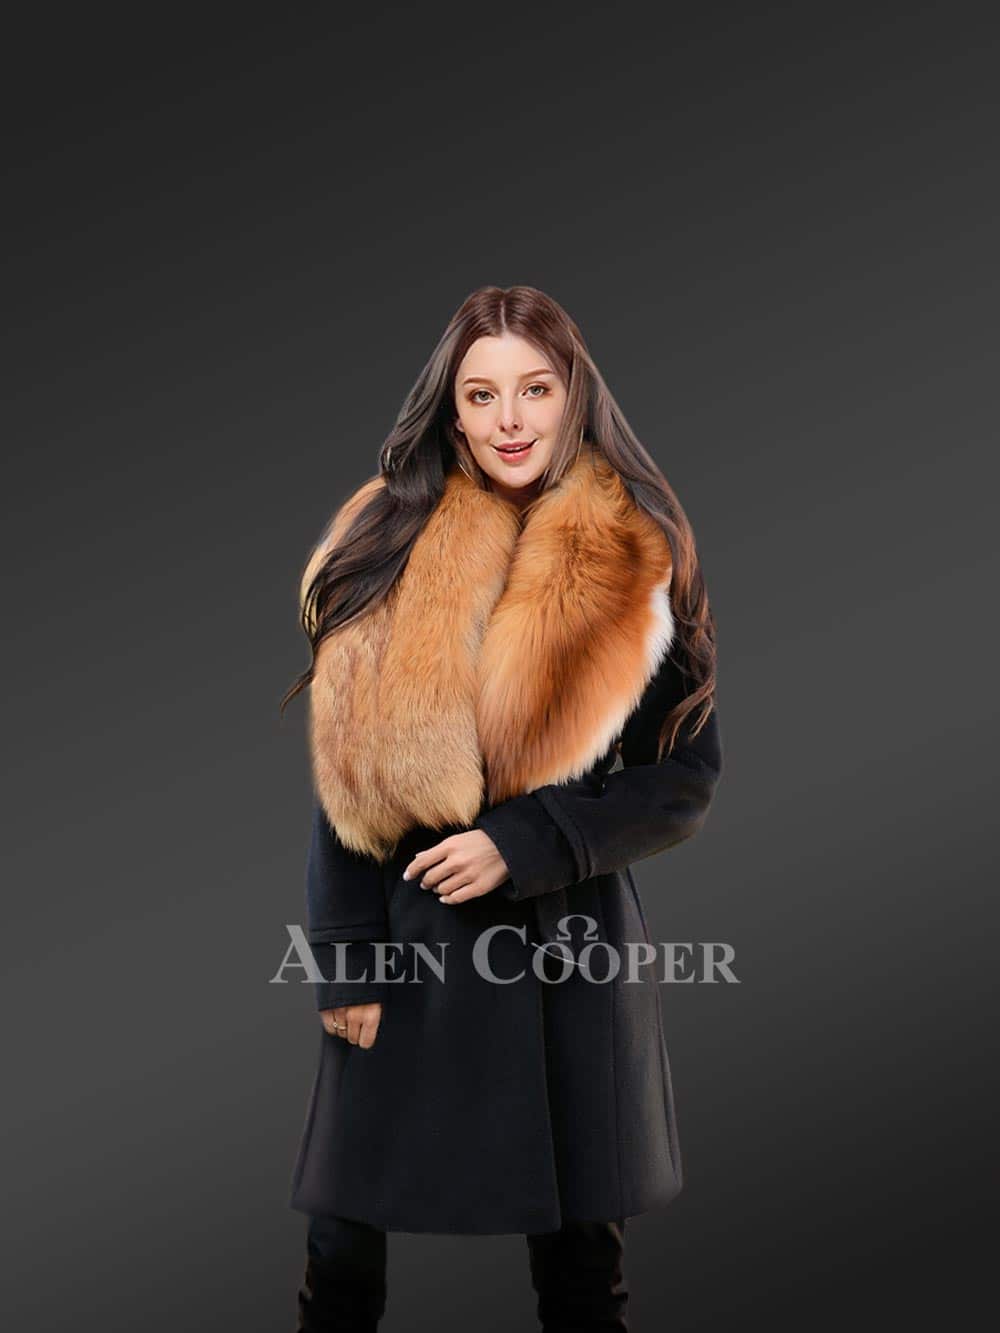 Alen Cooper Fur Coats for Men in Red to Boost Appeal